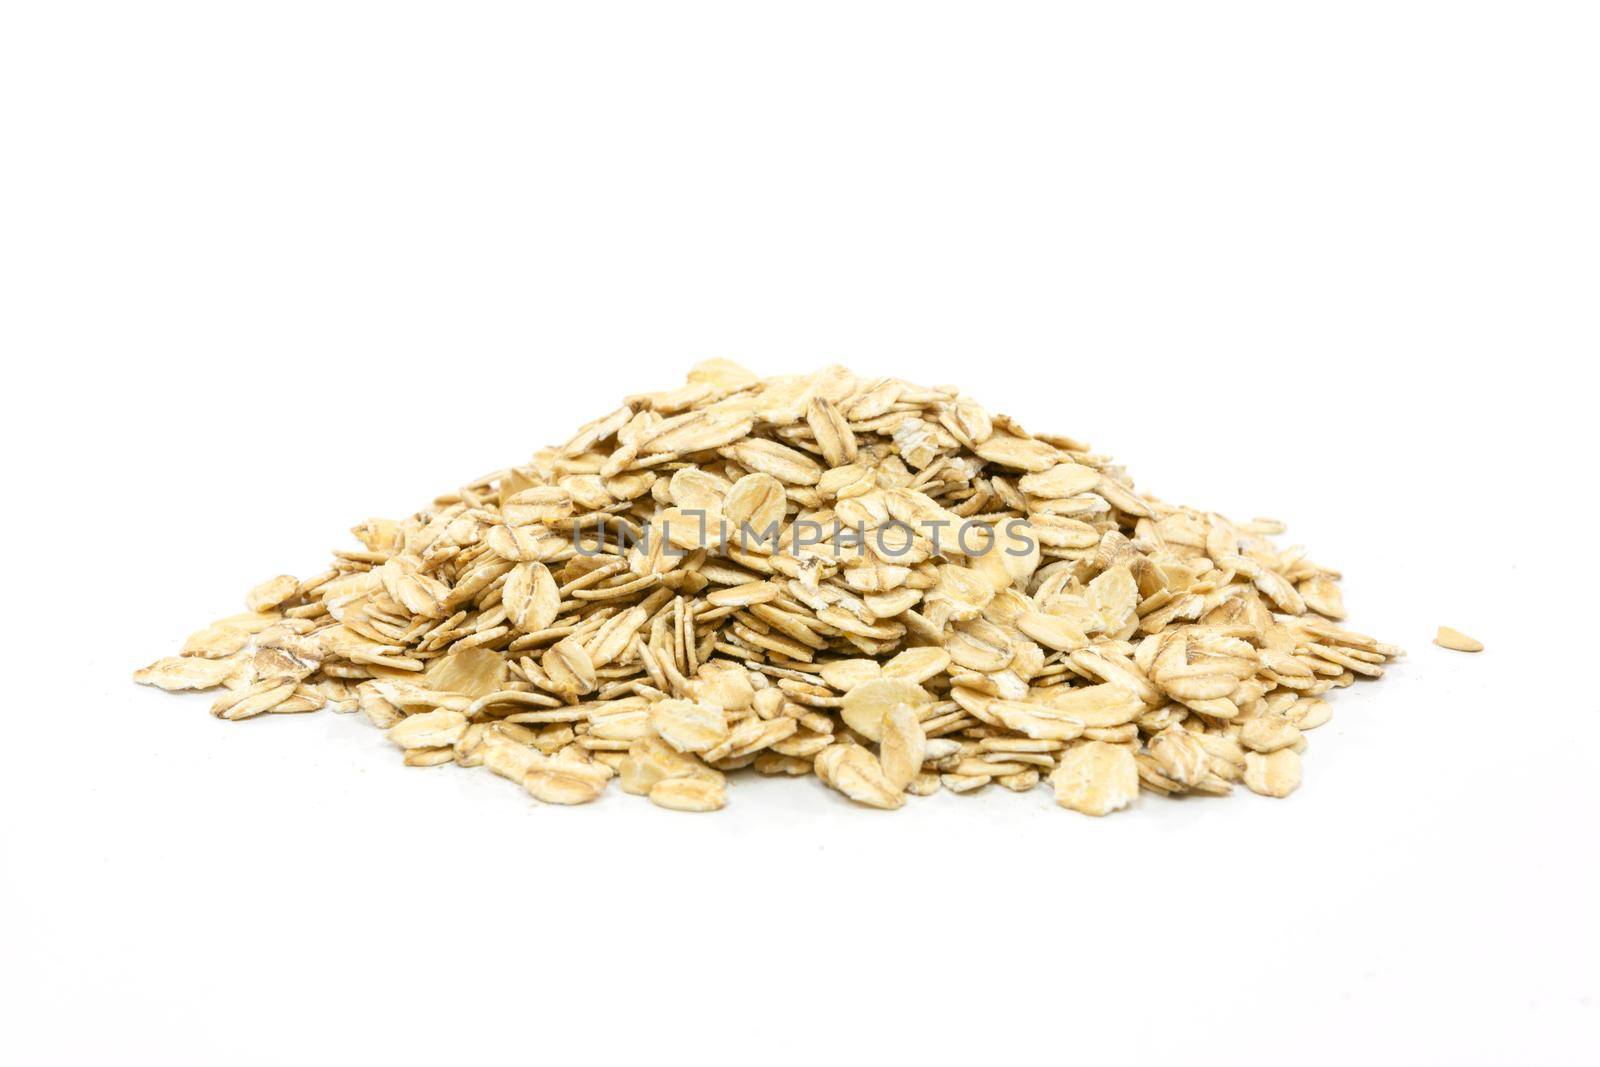 Heap of oatmeal flakes on a white background in close-up